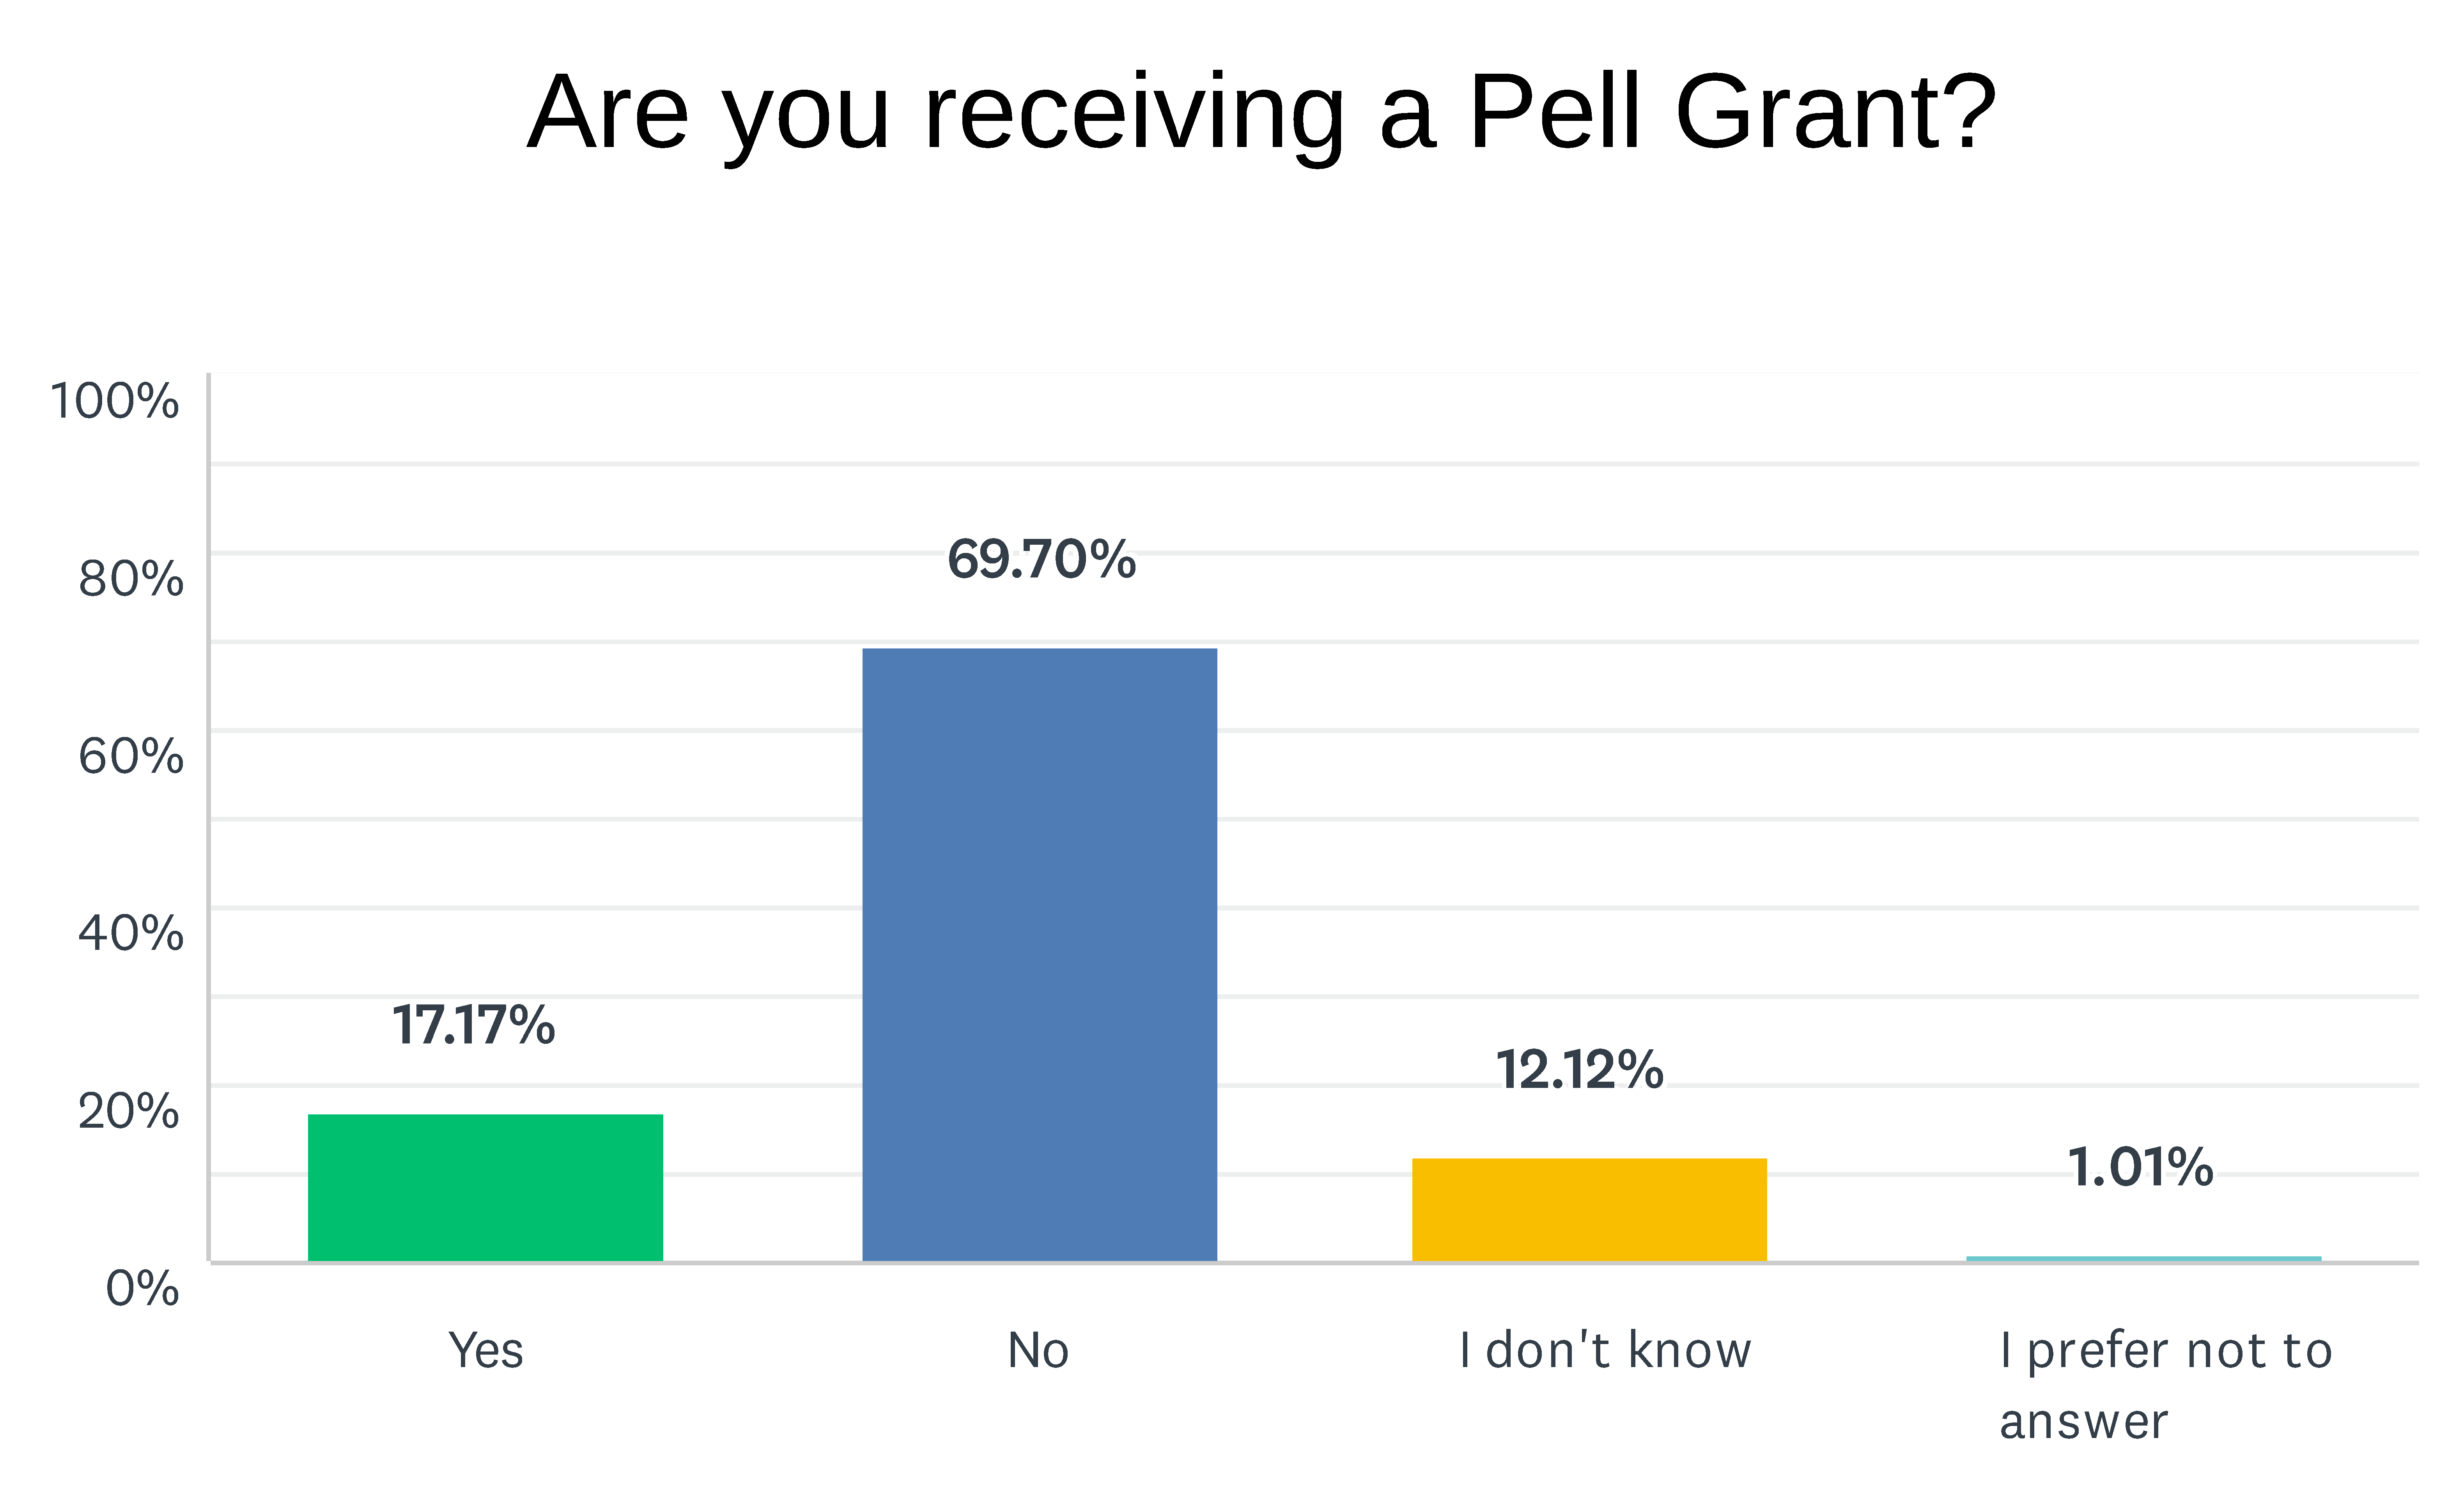 Survey question: are you receiving a Pell Grant? Responses: 17.17% yes, 69.70% no, 12.12% I don't know, and 1.01% I prefer not to answer.